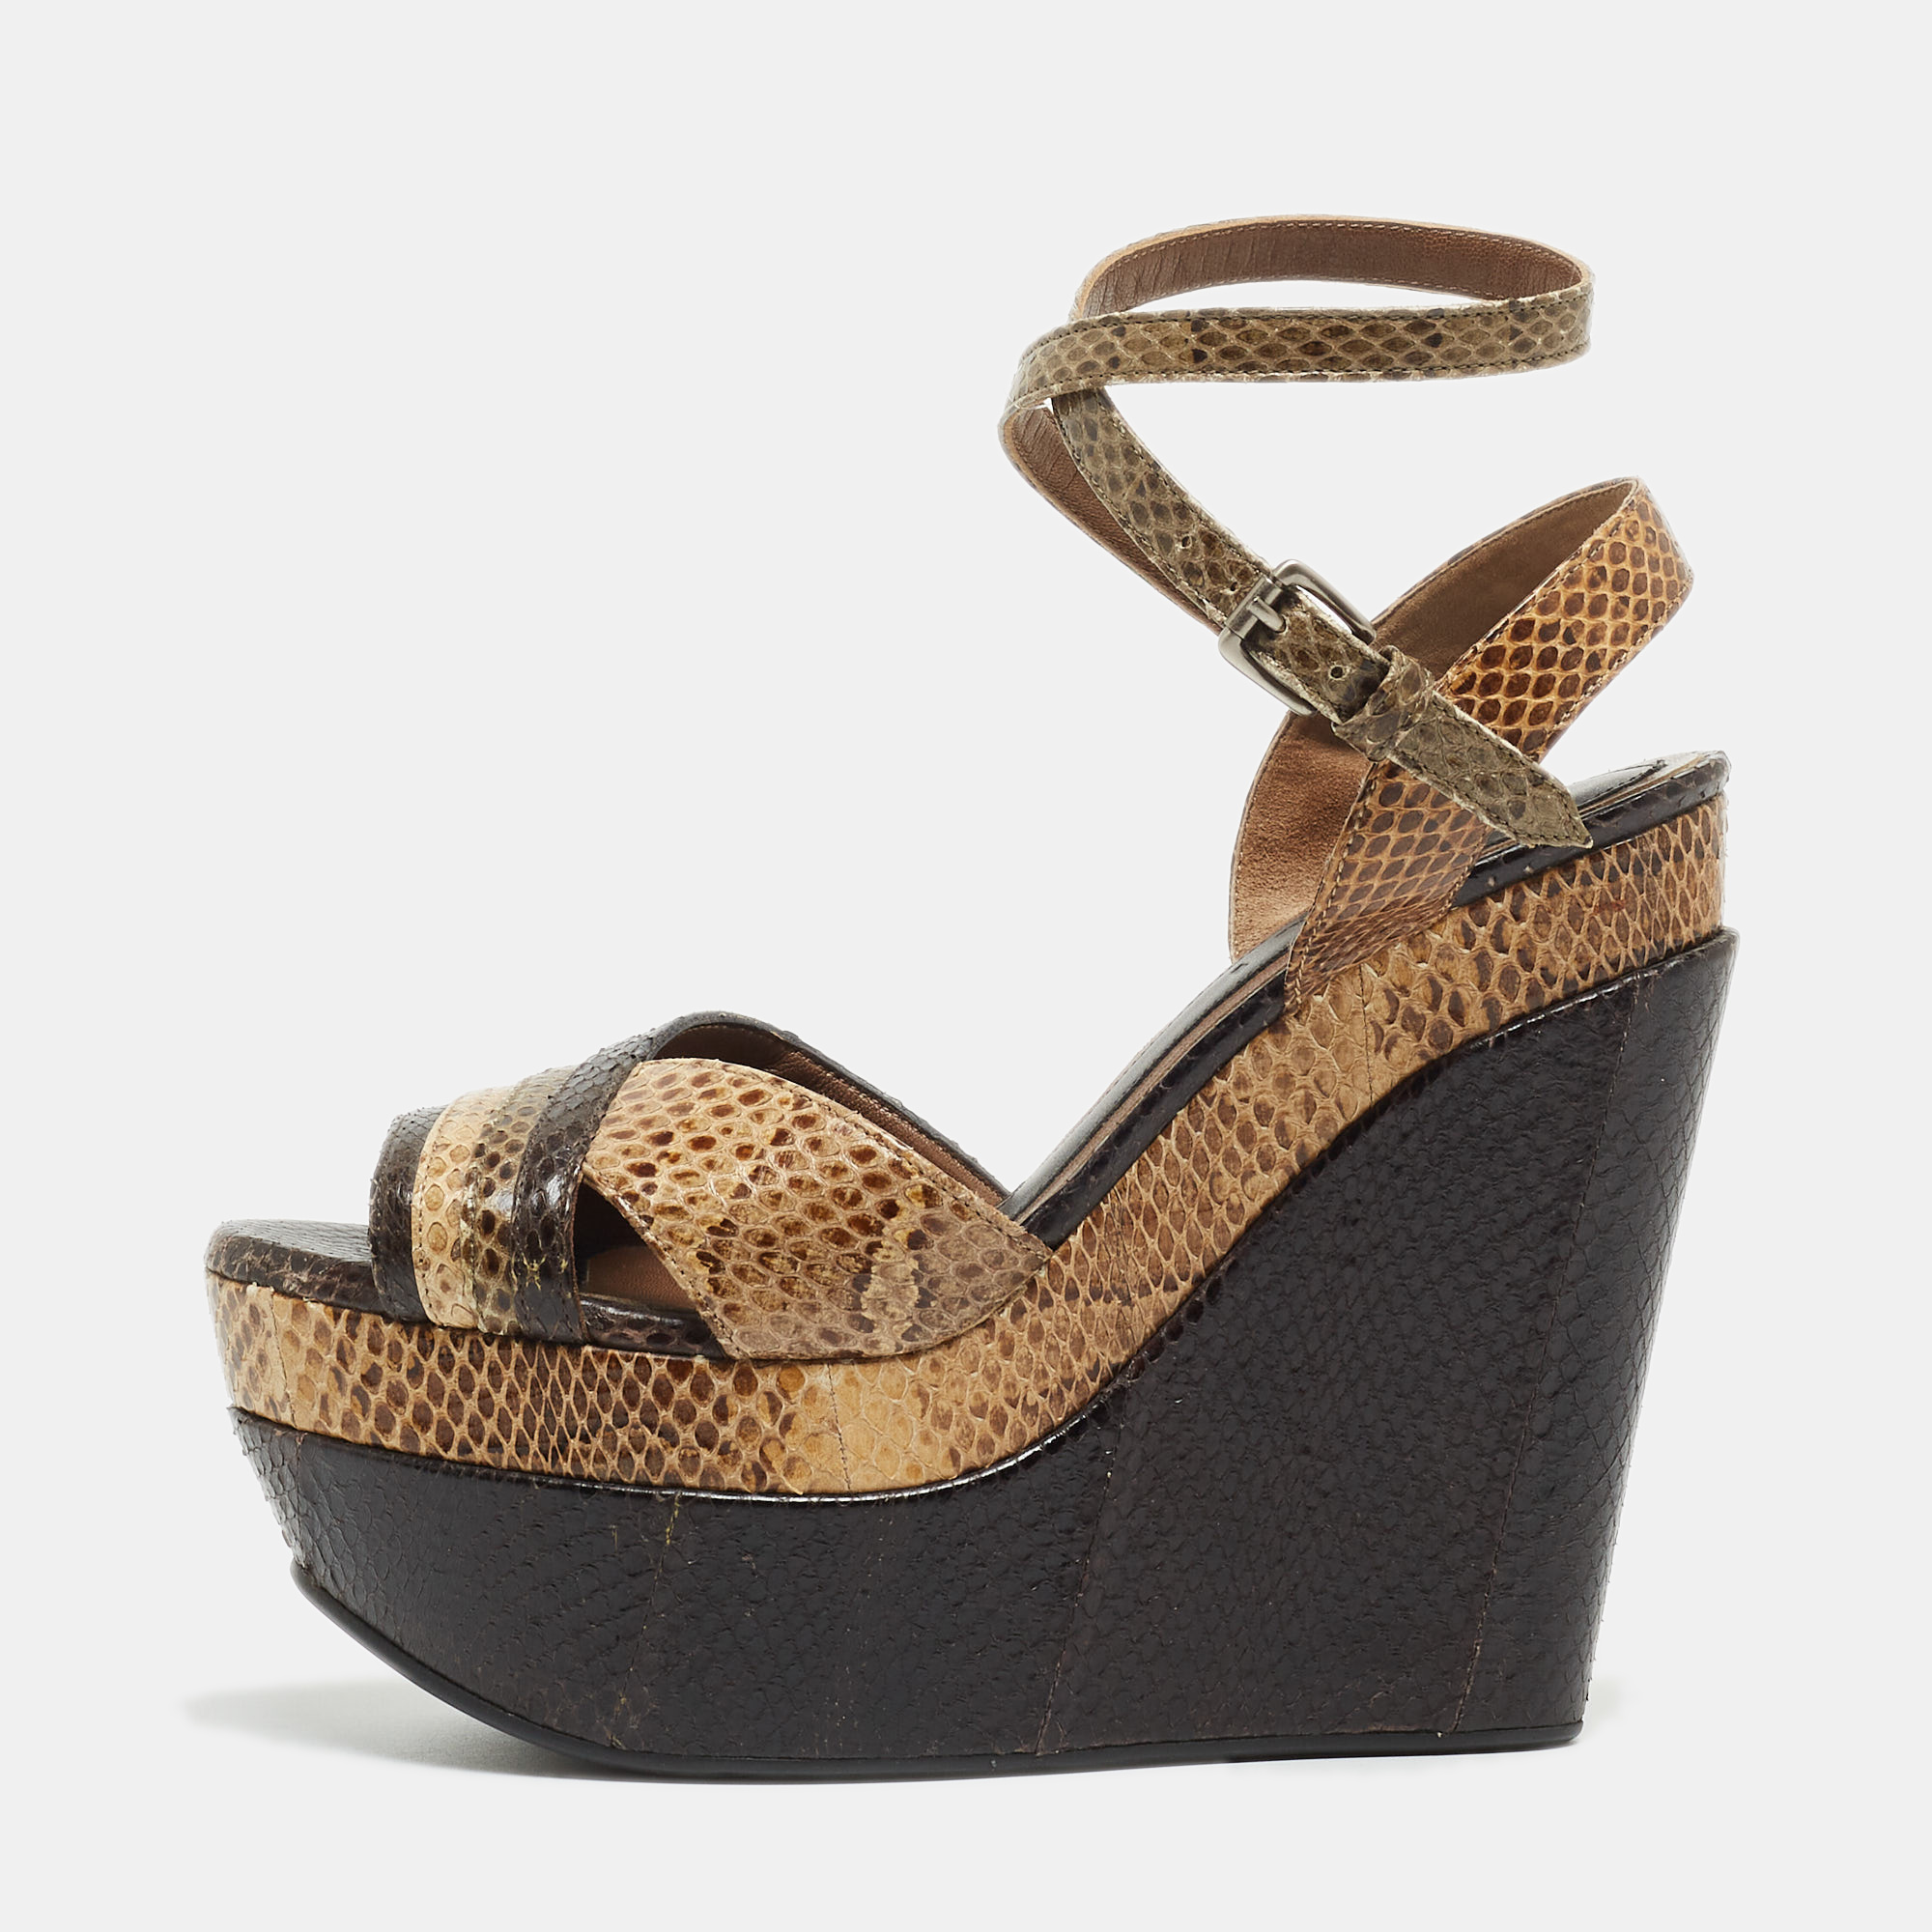 Pre-owned Marni Brown/beige Python Wedge Ankle Strap Sandals Size 38